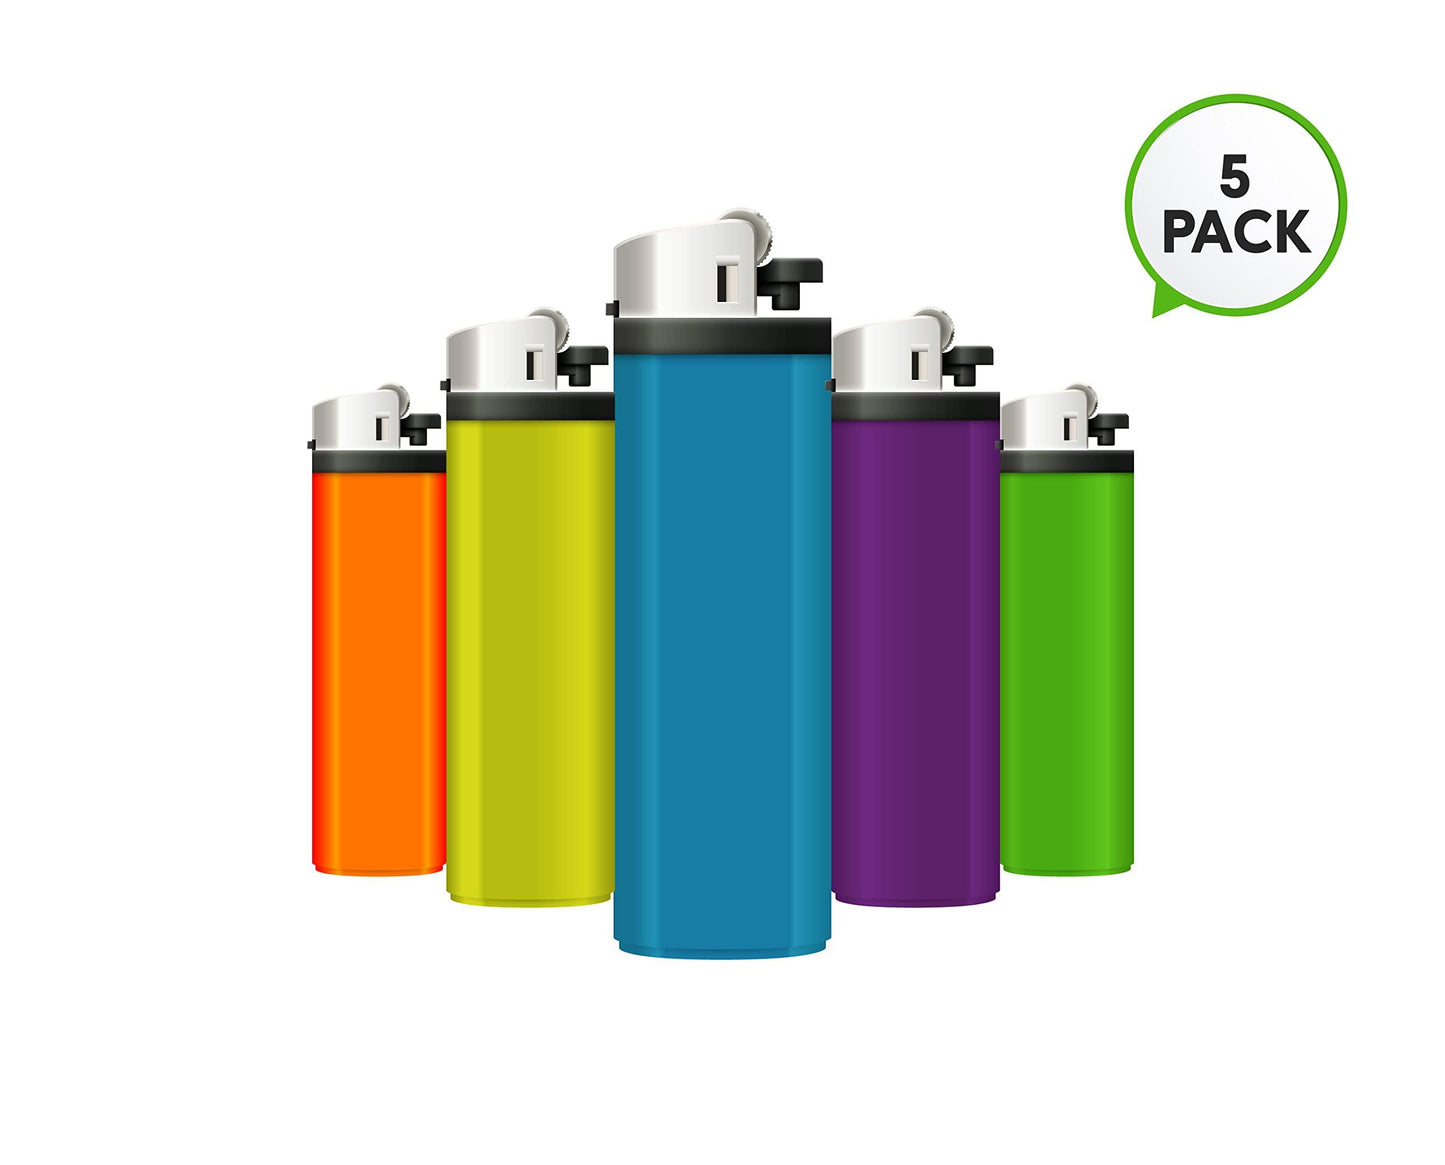 Scinex Classic Disposable Lighters, Multi Purpose and Lightweight, Candle Lighters, Cigerette Lighter, for BBQ and Outdoors, 5 Pack - CookCave